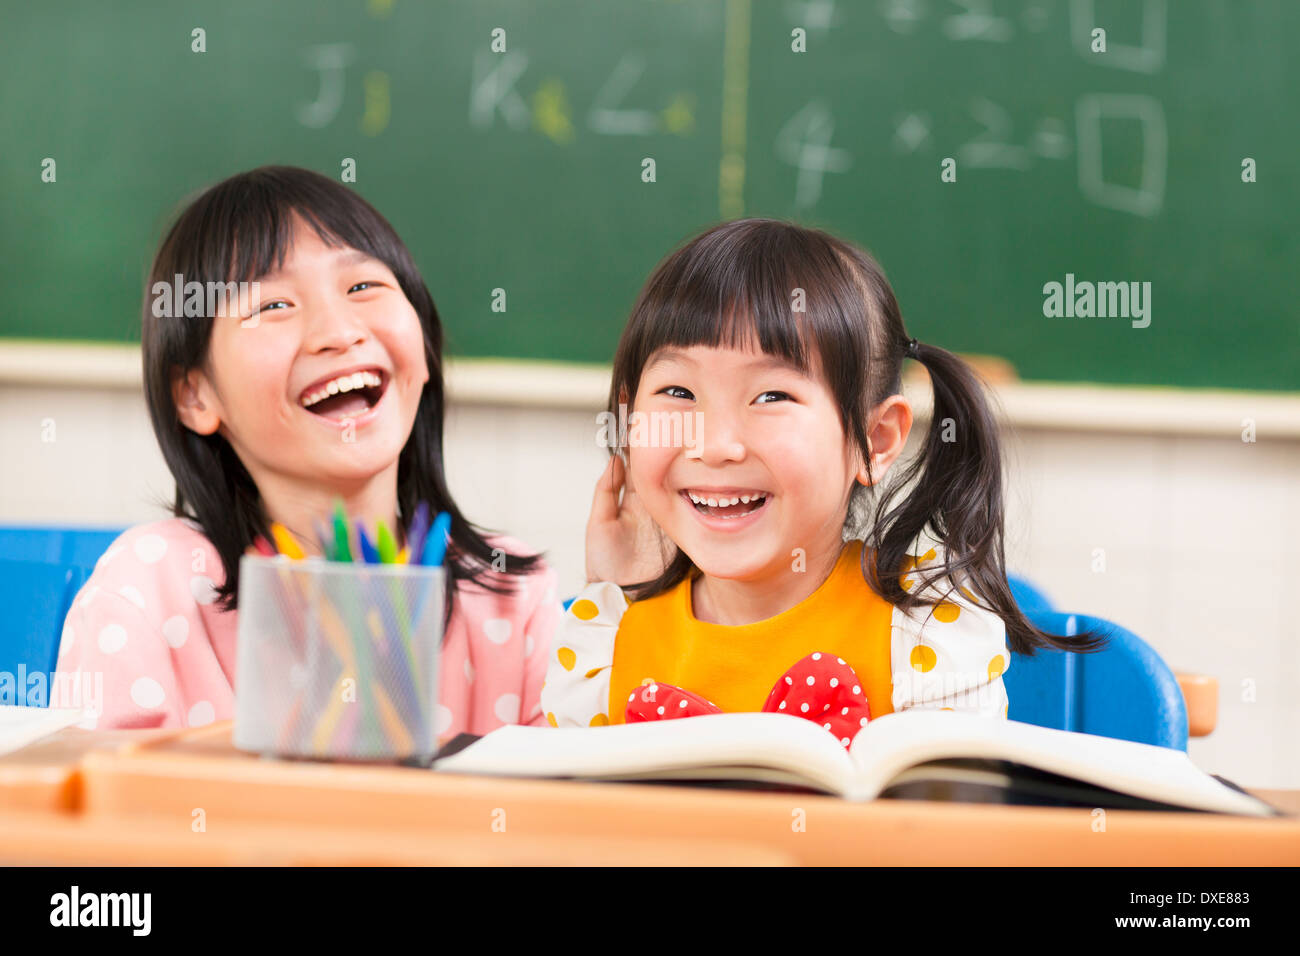 happy and lovely childrens in the classroom Stock Photo